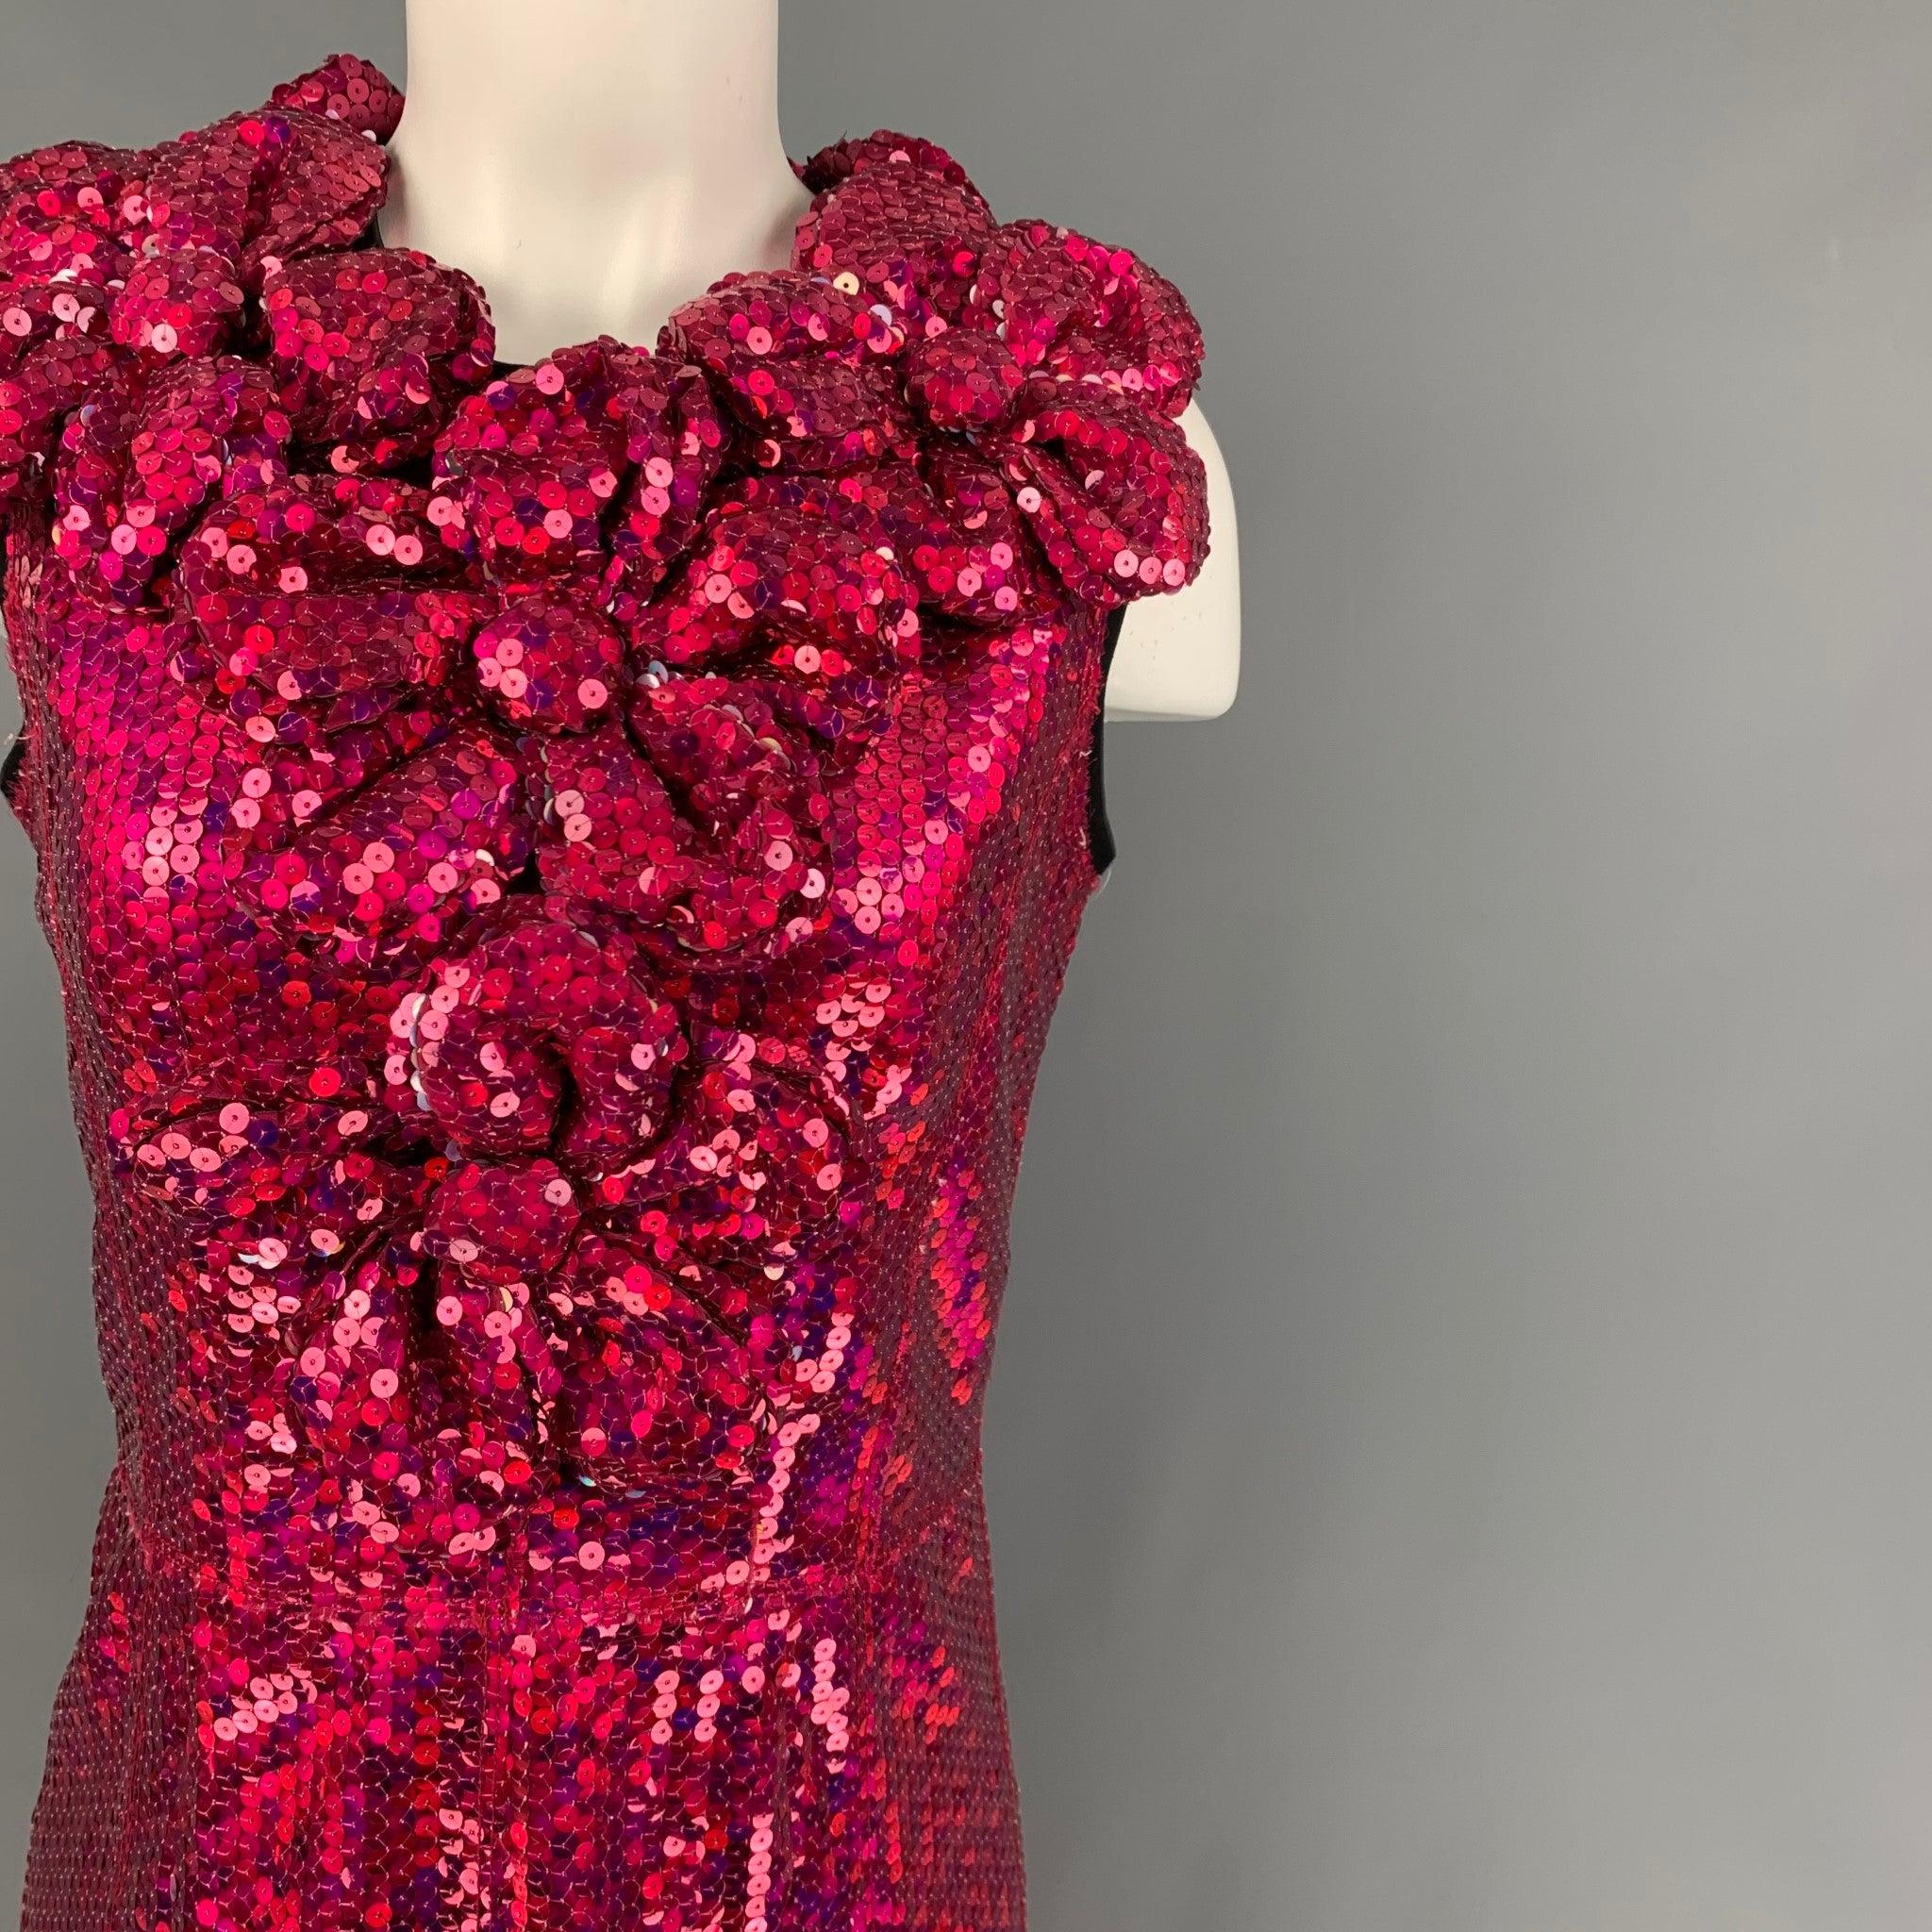 MARC JACOBS dress comes in a red & purple sequin polyester featuring a shift style, large flower details, sleeveless, and a back zip up closure. Made in USA.
Very Good
Pre-Owned Condition. 

Marked:   4 

Measurements: 
 
Shoulder: 15 inches  Bust: